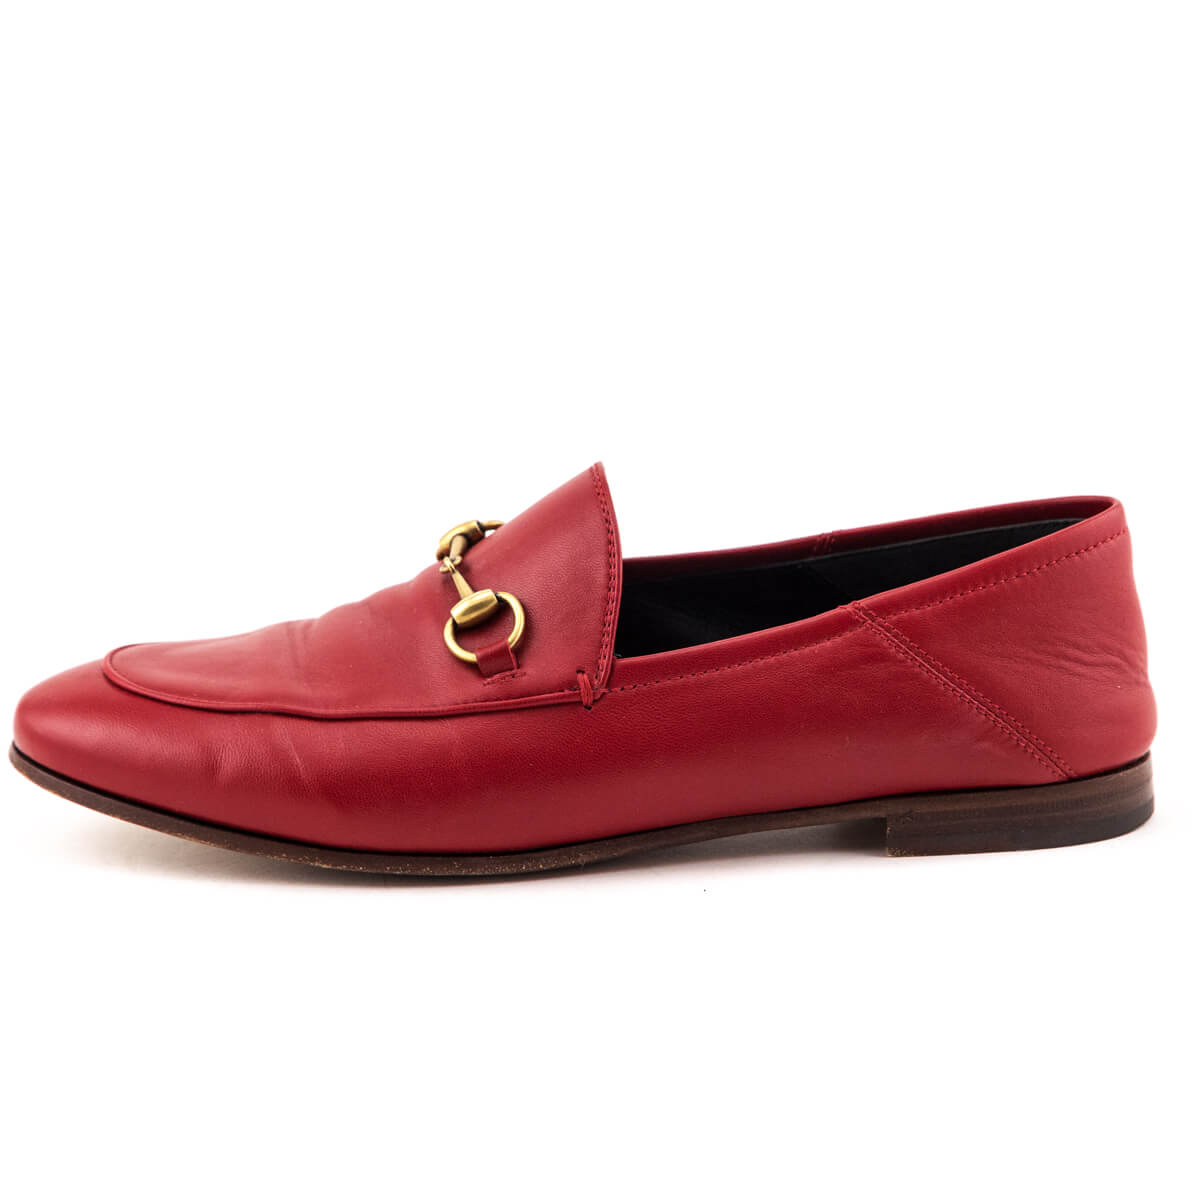 Gucci Red Leather Brixton Horsebit Loafers Size US 9 | IT 39 - Love that Bag etc - Preowned Authentic Designer Handbags & Preloved Fashions